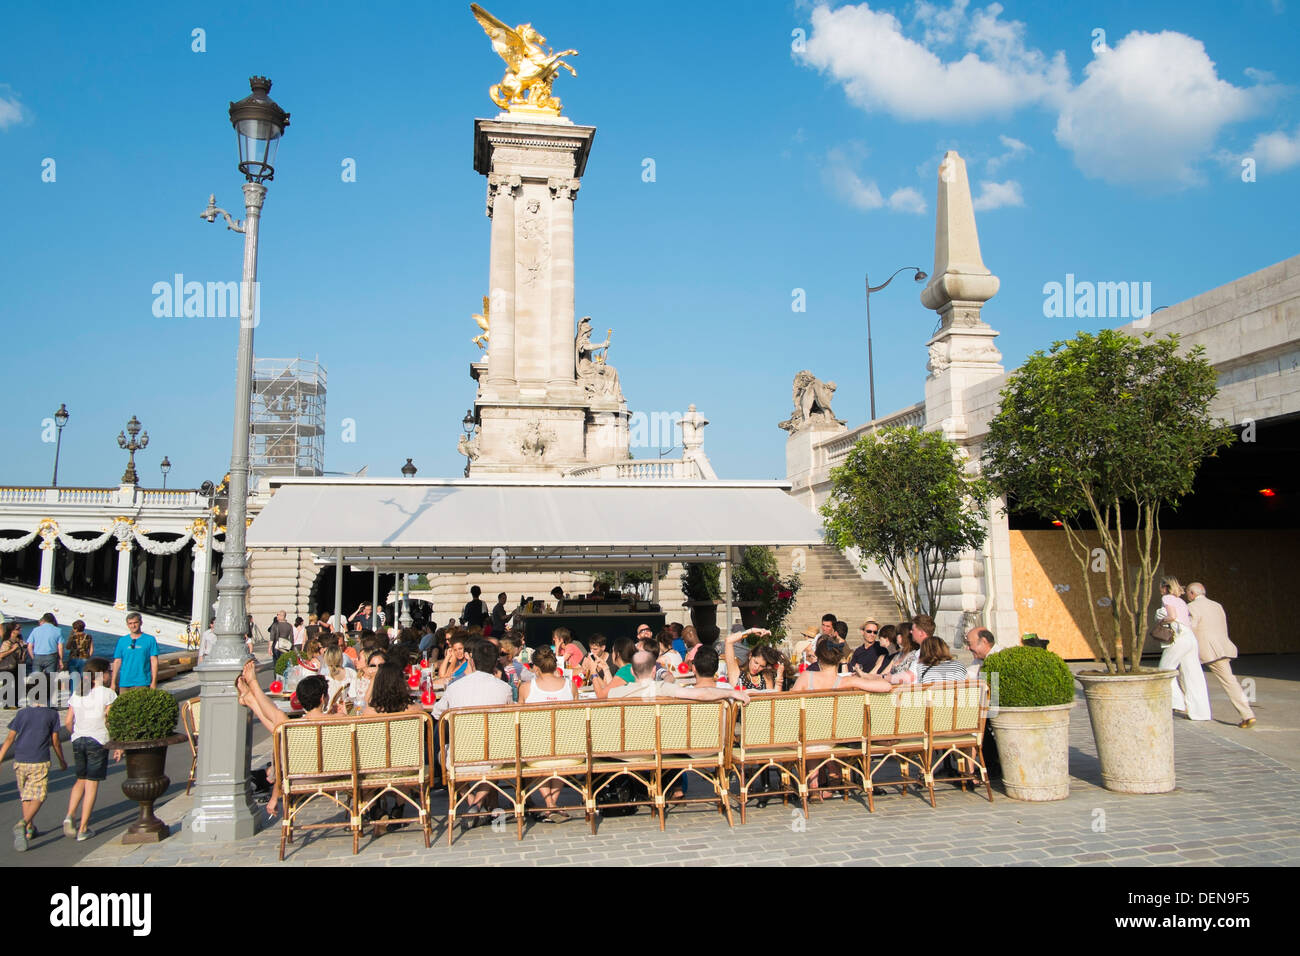 People eating at one of the new restaurants at Les Berges, along the Seine, Paris, France Stock Photo